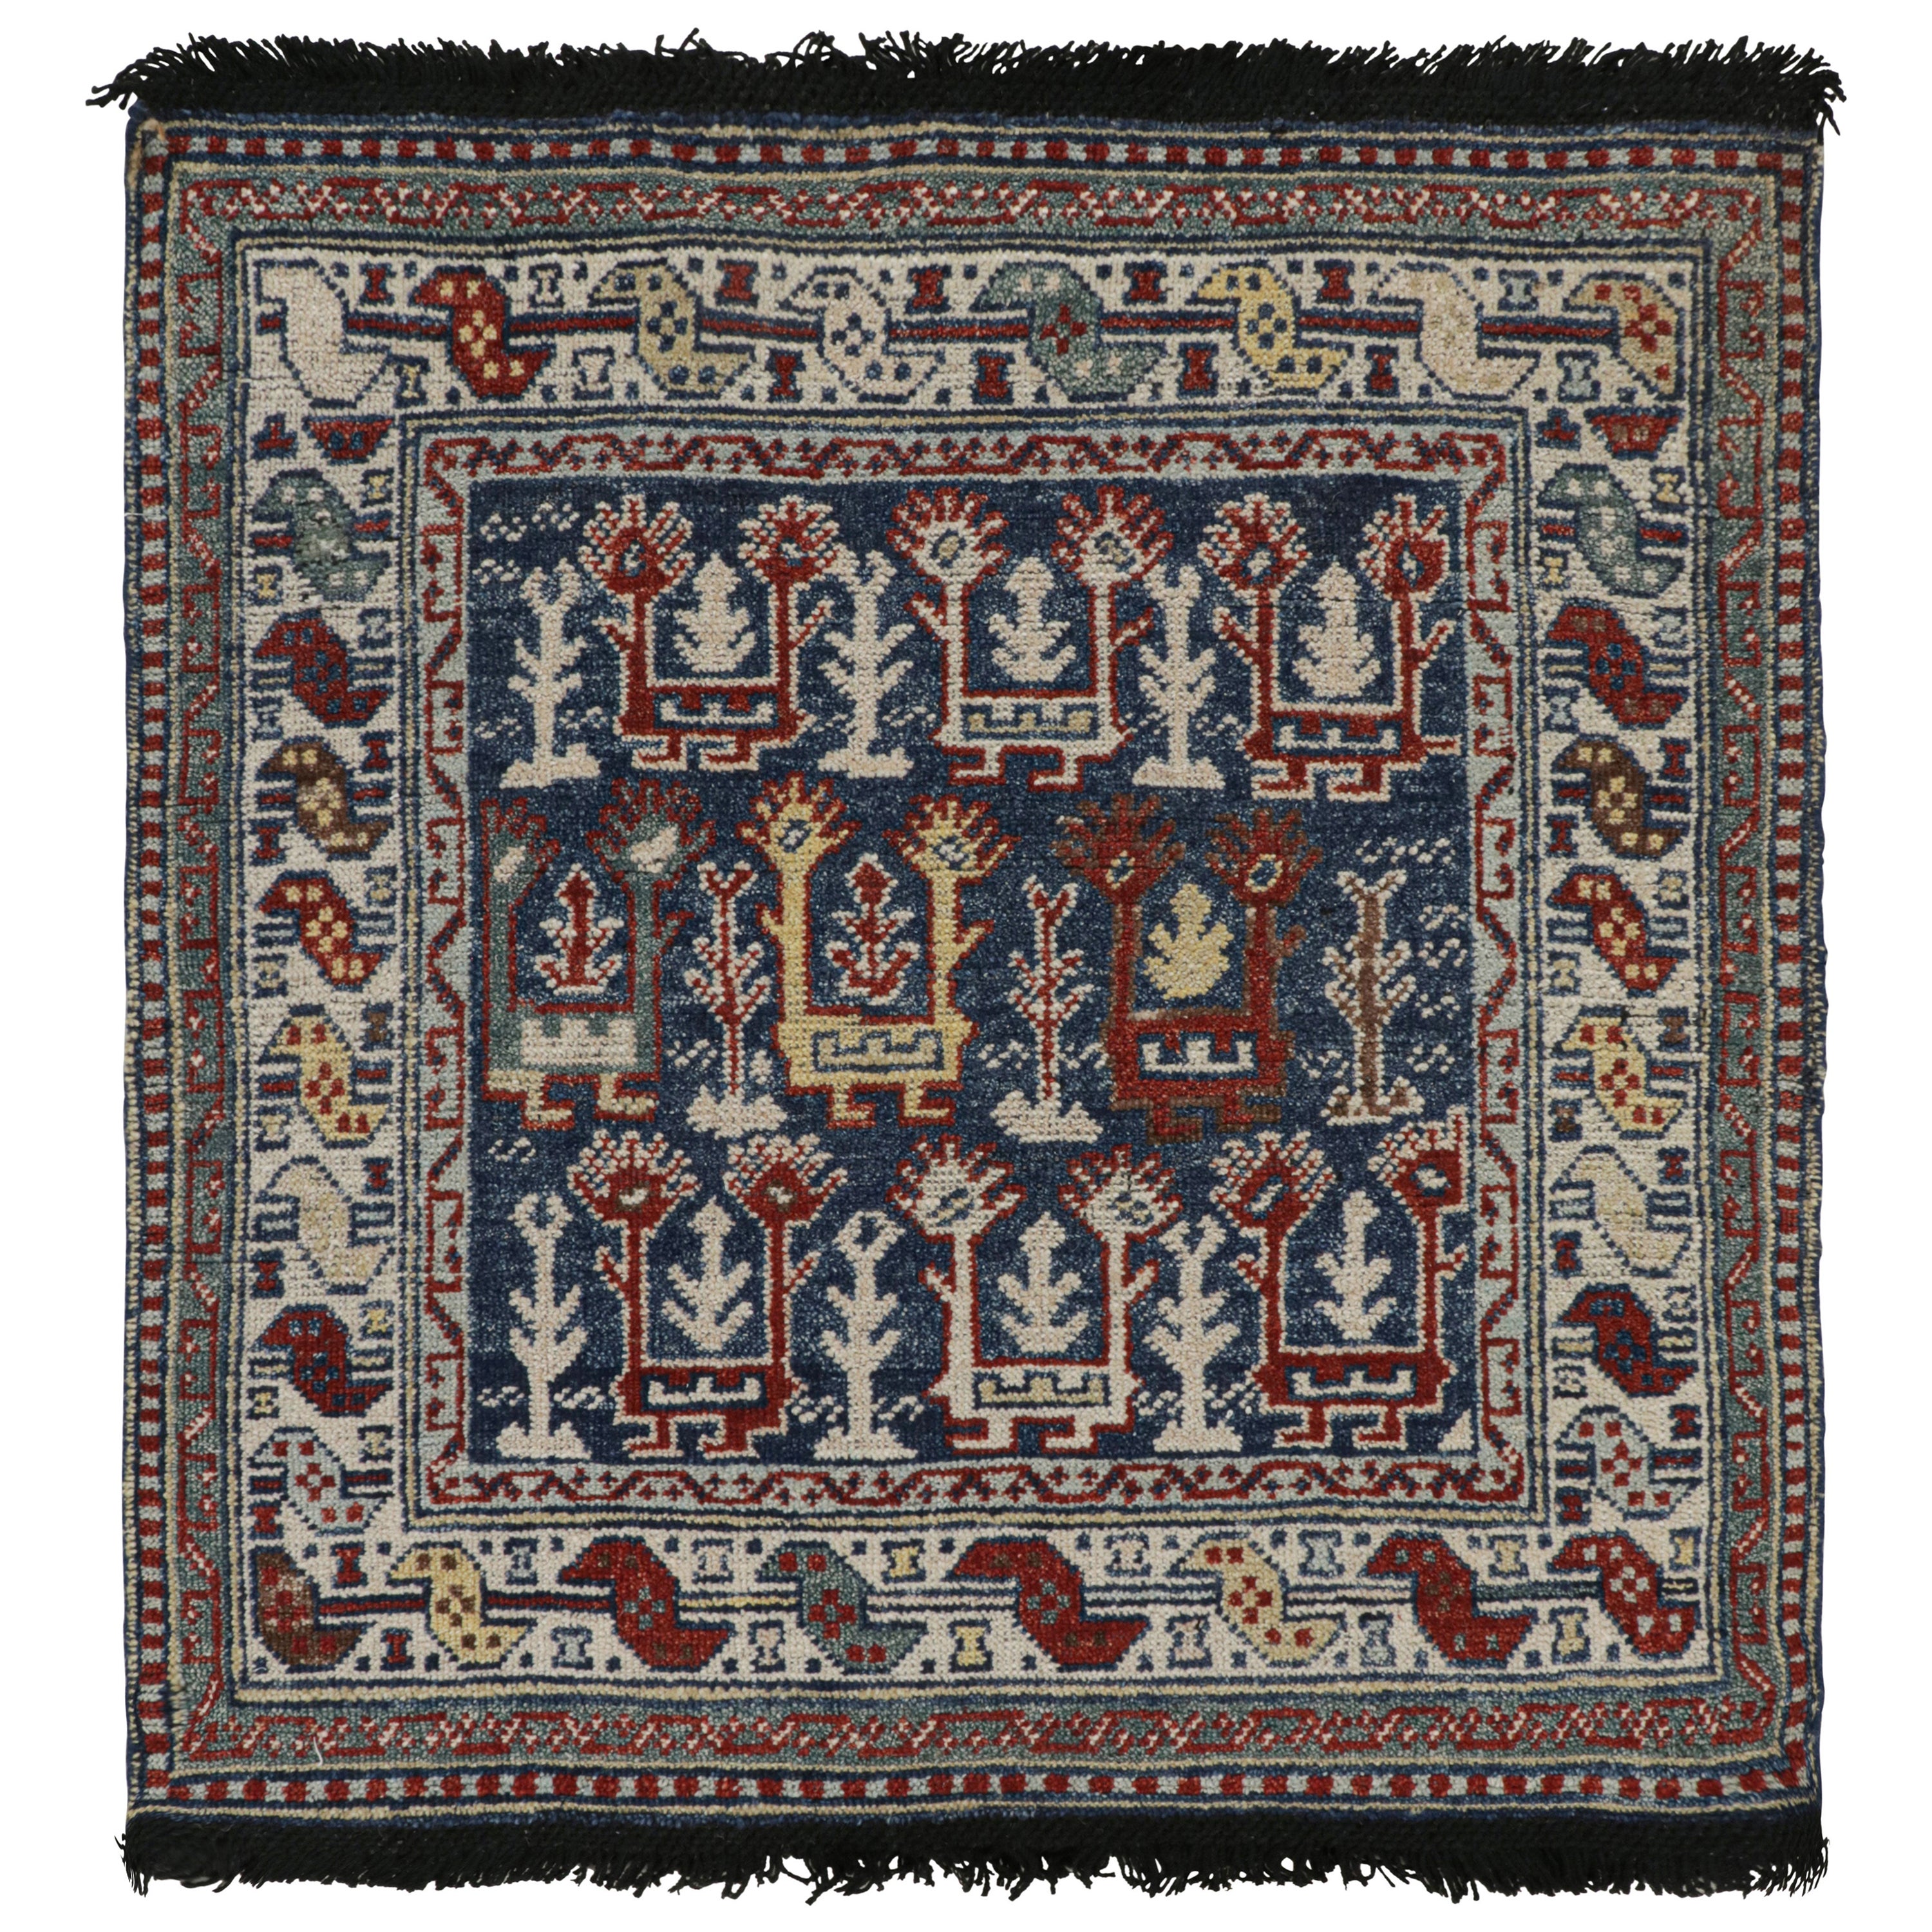 Rug & Kilim’s Blue Tribal Style Square Rug with Primitivist Geometric Patterns For Sale